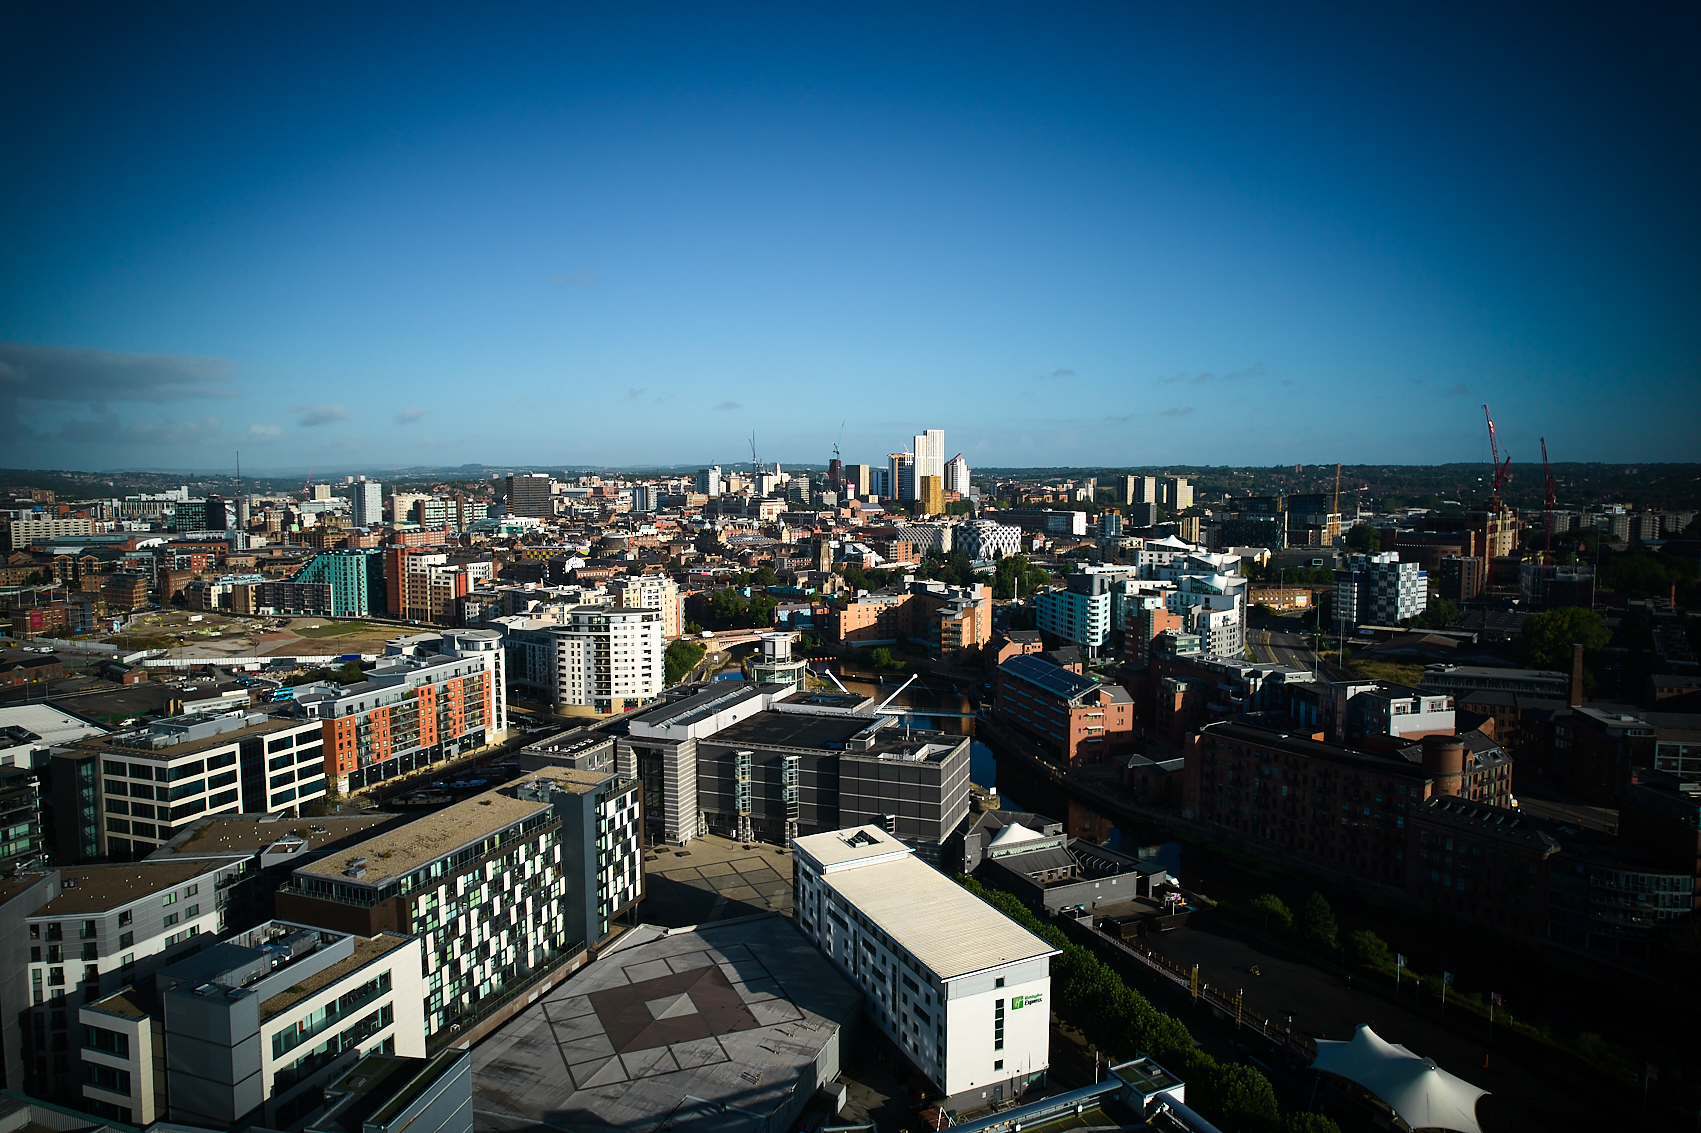 Aerial view of the city of Leeds